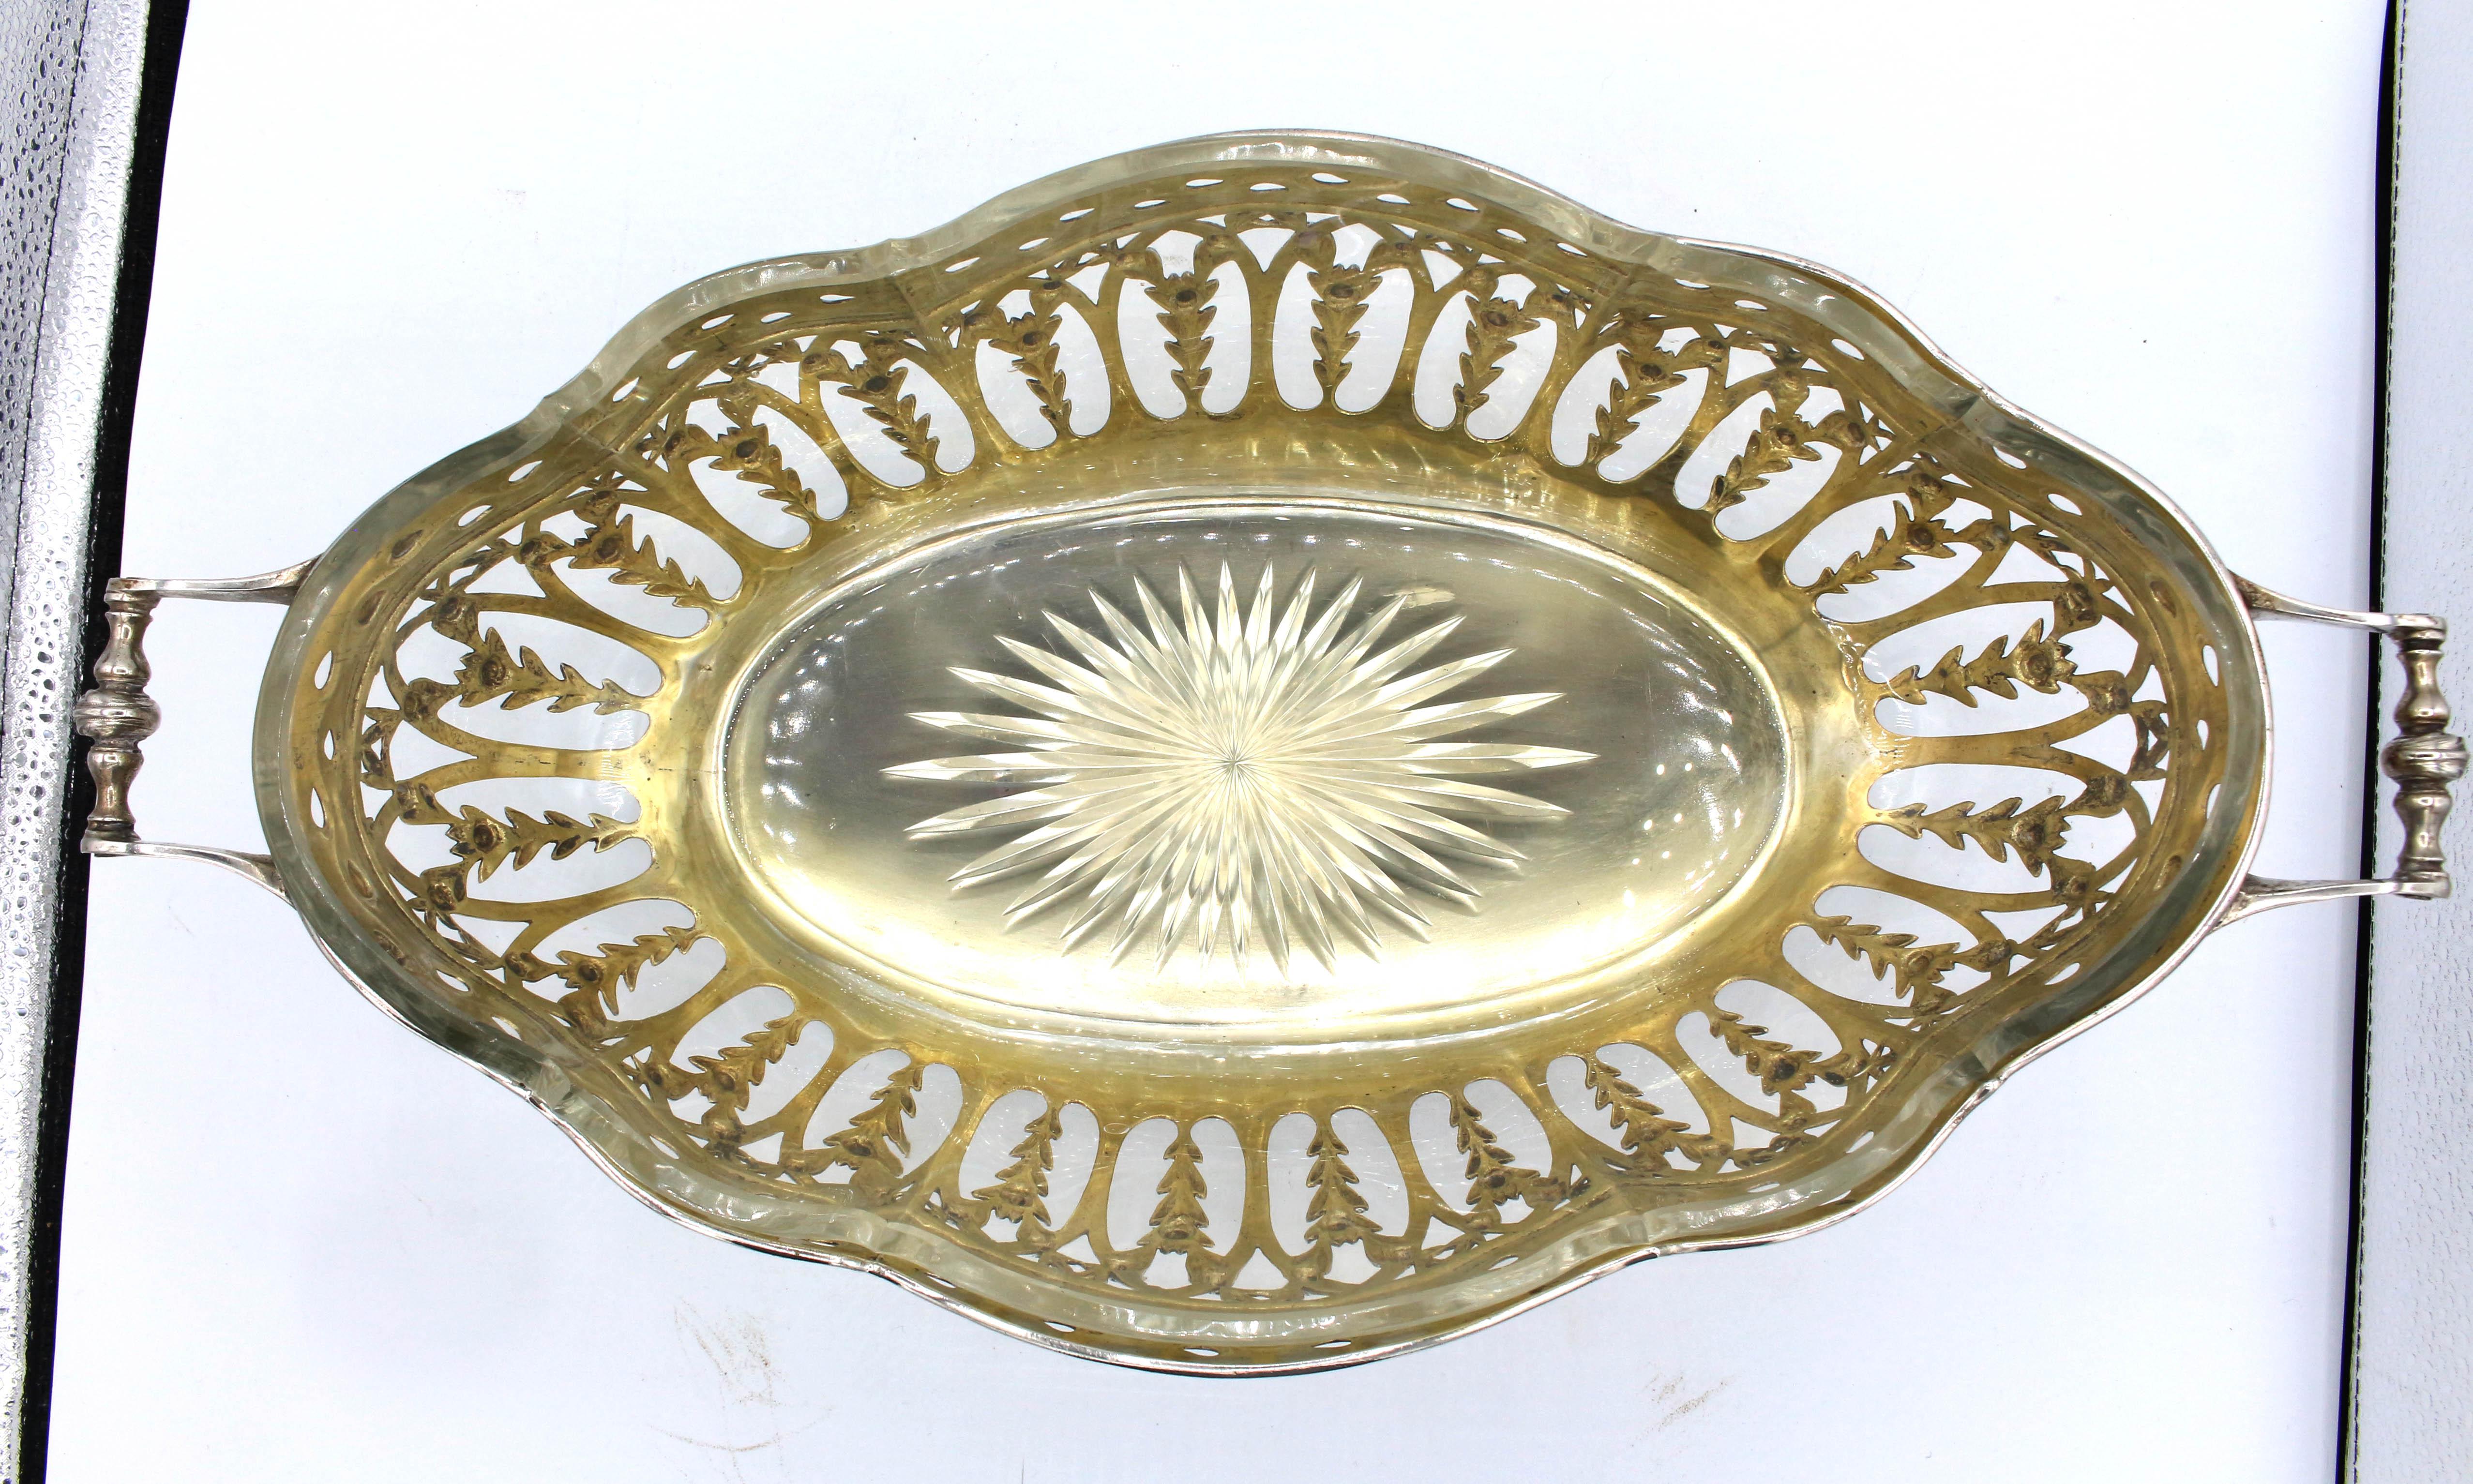 Continental 800 silver standard centerpiece bowl with liner, 1911. Original glass liner & gilded interior. The exterior is festooned with flowers. Running leaves border reticulation. Acanthus leaf scrolled feet. Marked 800 & SSH with a star. 33.70